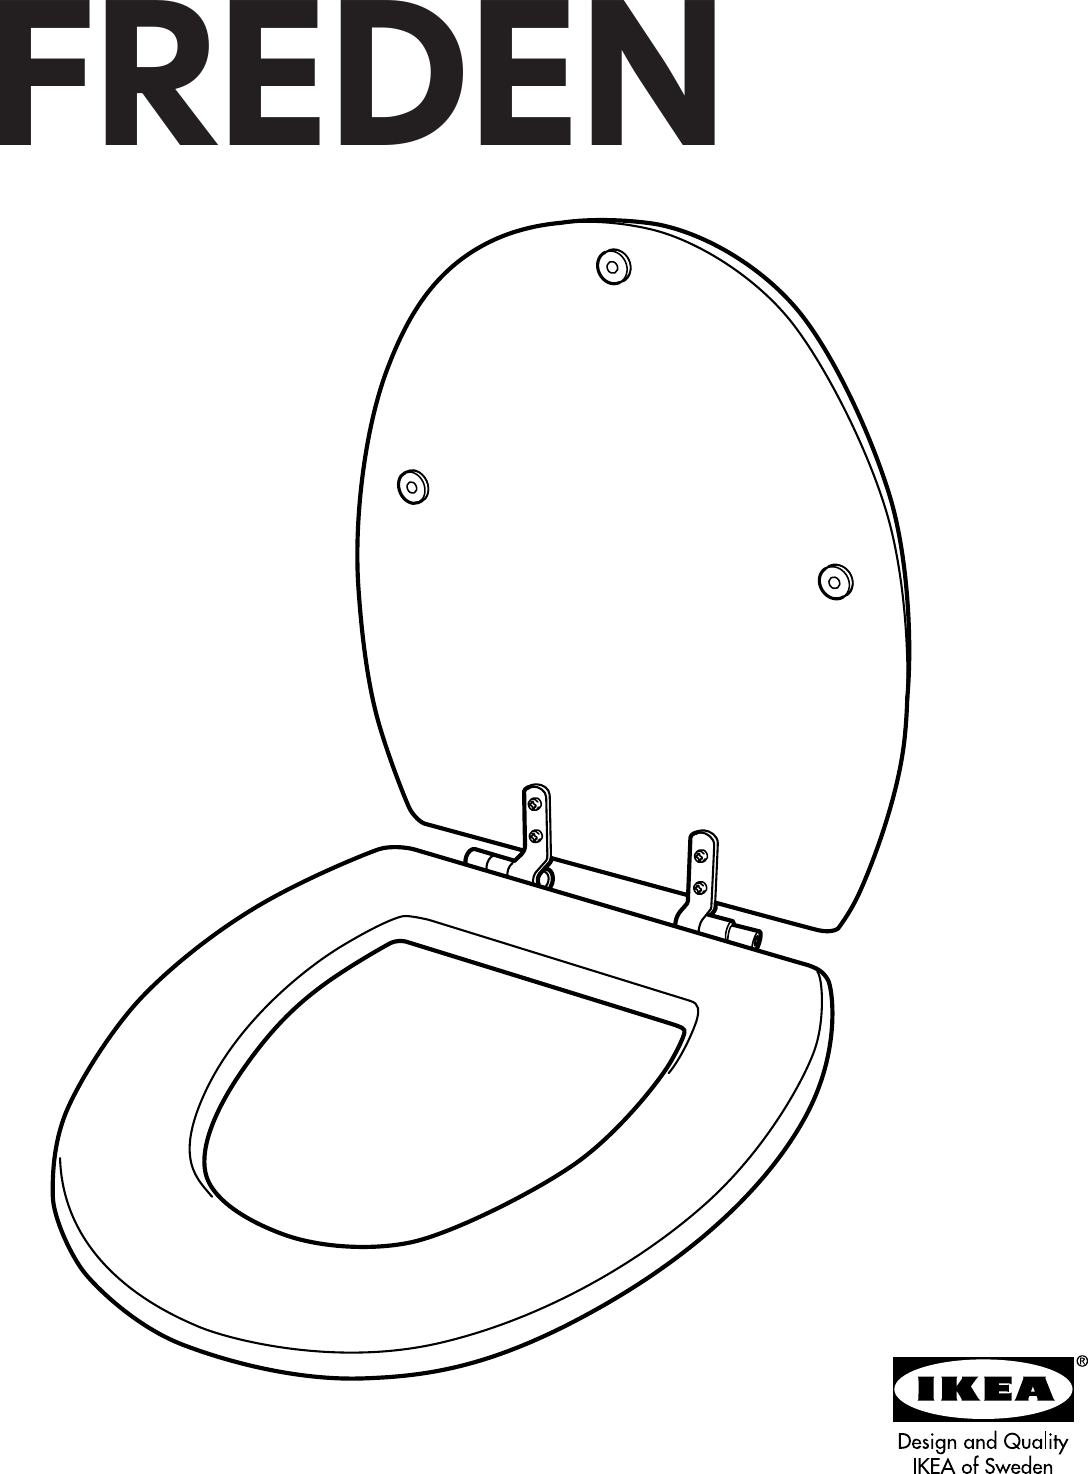 Page 1 of 8 - Ikea Ikea-Freden-Toilet-Seat-Assembly-Instruction